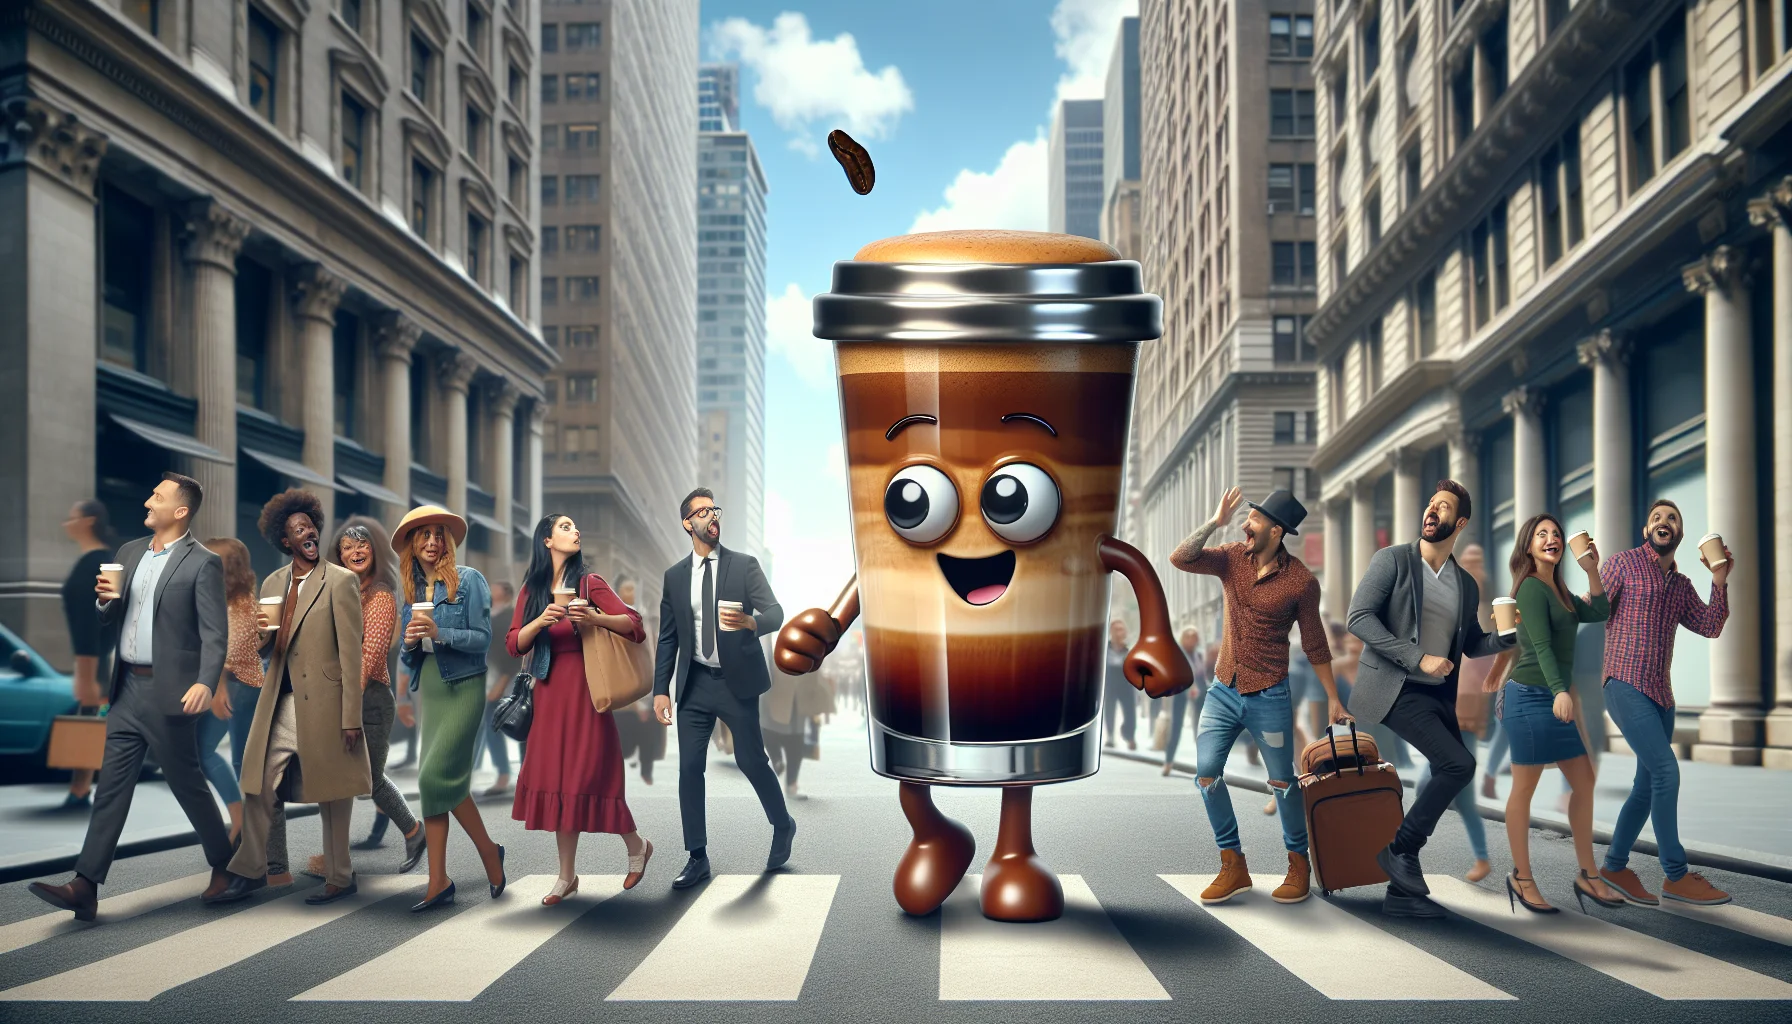 Create an amusing and realistic scene in which an espresso lungo takes on human characteristics. This espresso lungo, in the form of a cartoon character, is enticing passerby to come and take a sip. The coffee character is in a setting typical of a bustling city, with tall buildings as a backdrop and people from diverse descents such as Hispanic, Caucasian and South Asian, all visibly intrigued by this unique spectacle. To add to the fun, the espresso lungo is performing a joyful dance while exuding tempting coffee aroma, captivating maximum attention. The entire scenery should radiate positivity, encouraging people to indulge in the flavorful delight of espresso lungo.